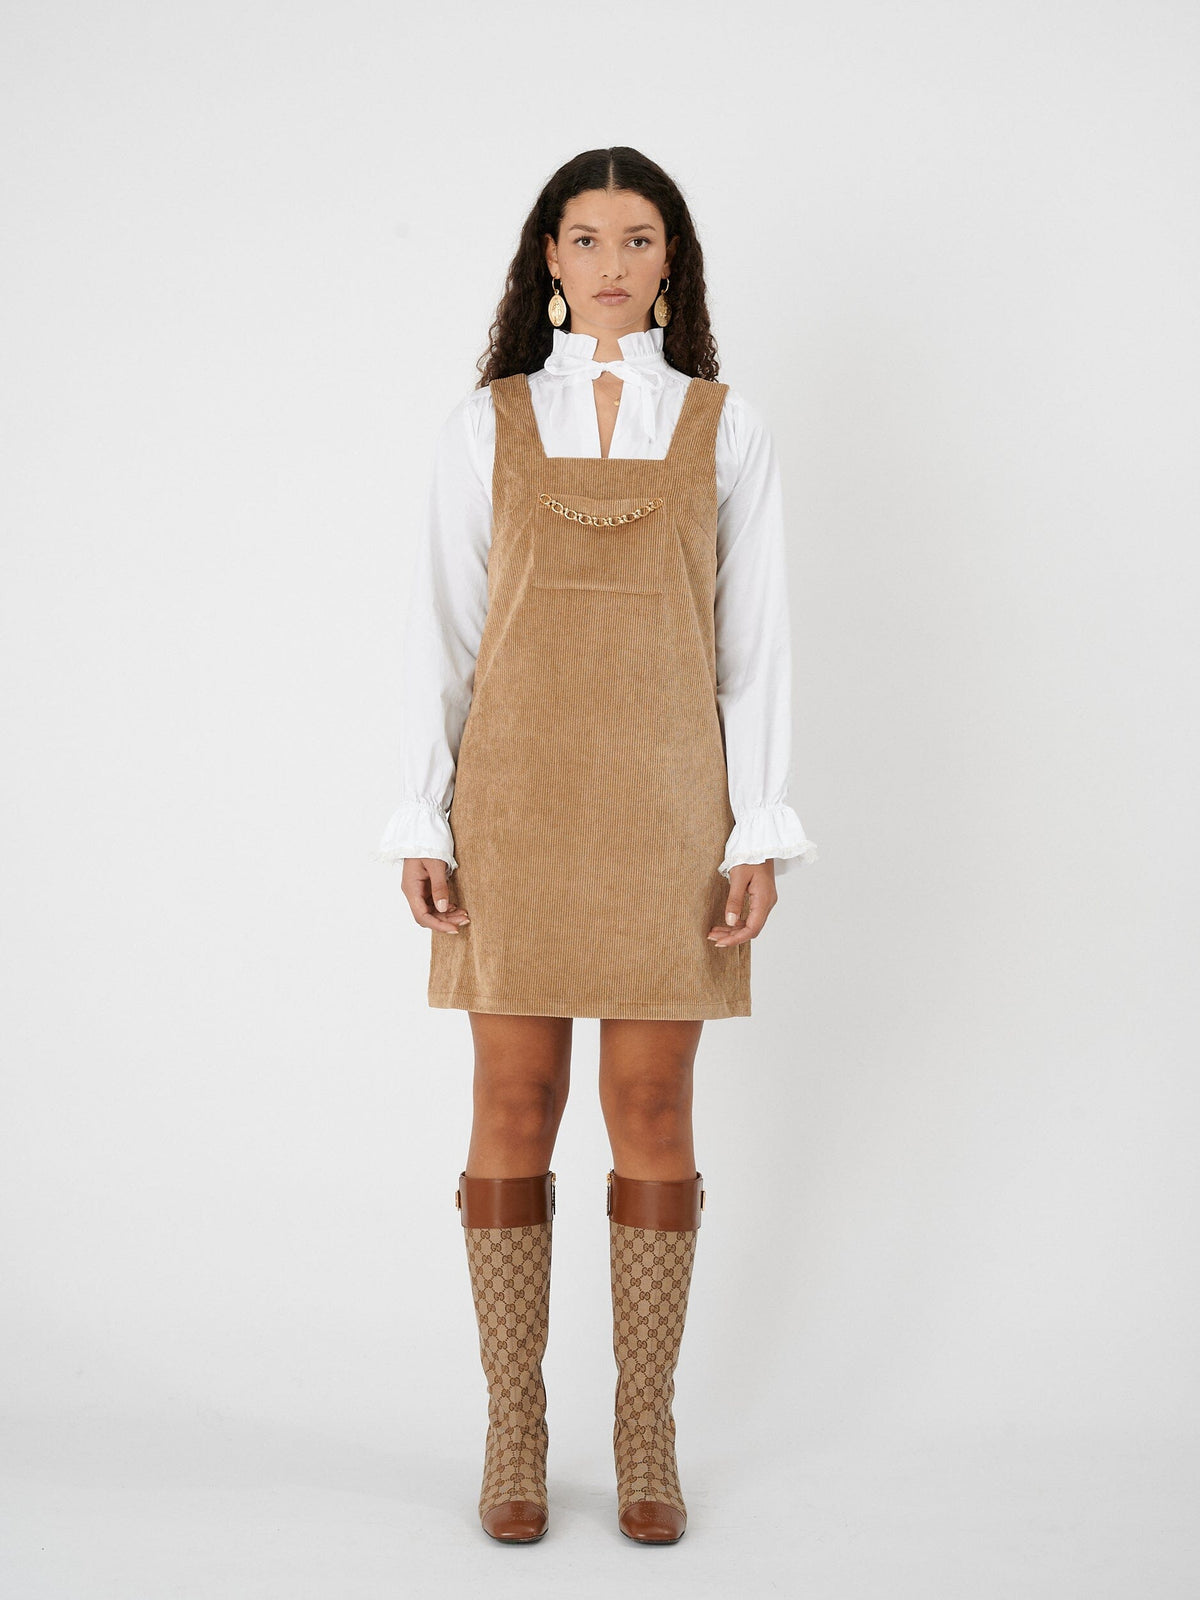 SASHA - Pinafore dress with gold chain in beige corduroy Dress Fête Impériale